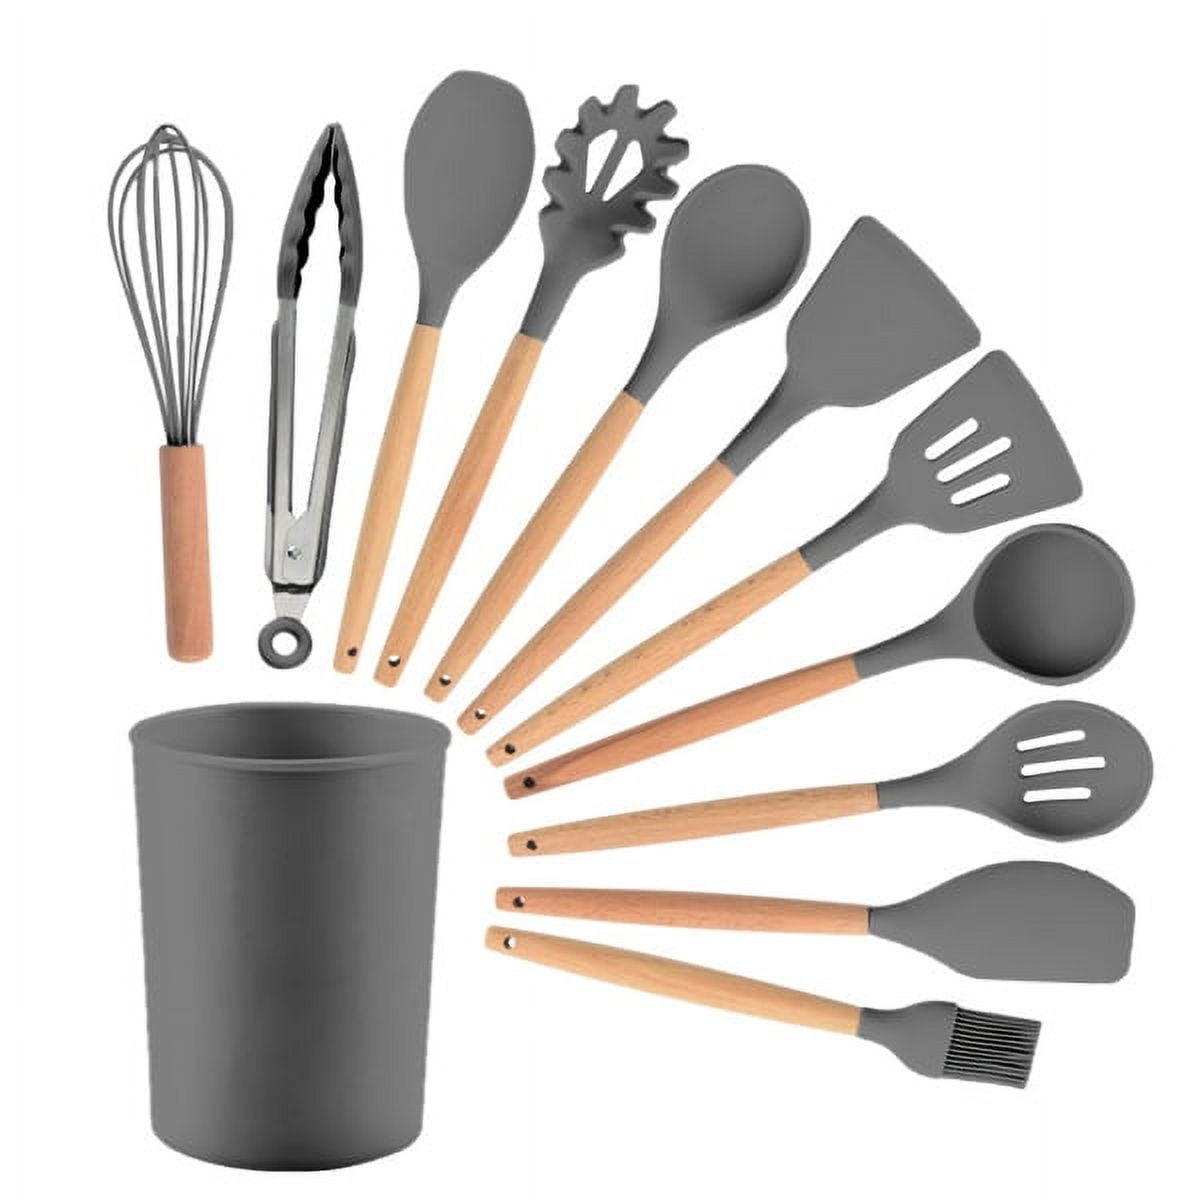 12 Pcs Silicone Cooking Utensils, Kitchen Utensil Set - 446°F Heat Resistant, Spatula,Turner Tongs, Spoon, Brush, Whisk. Yellow Kitchen Gadgets